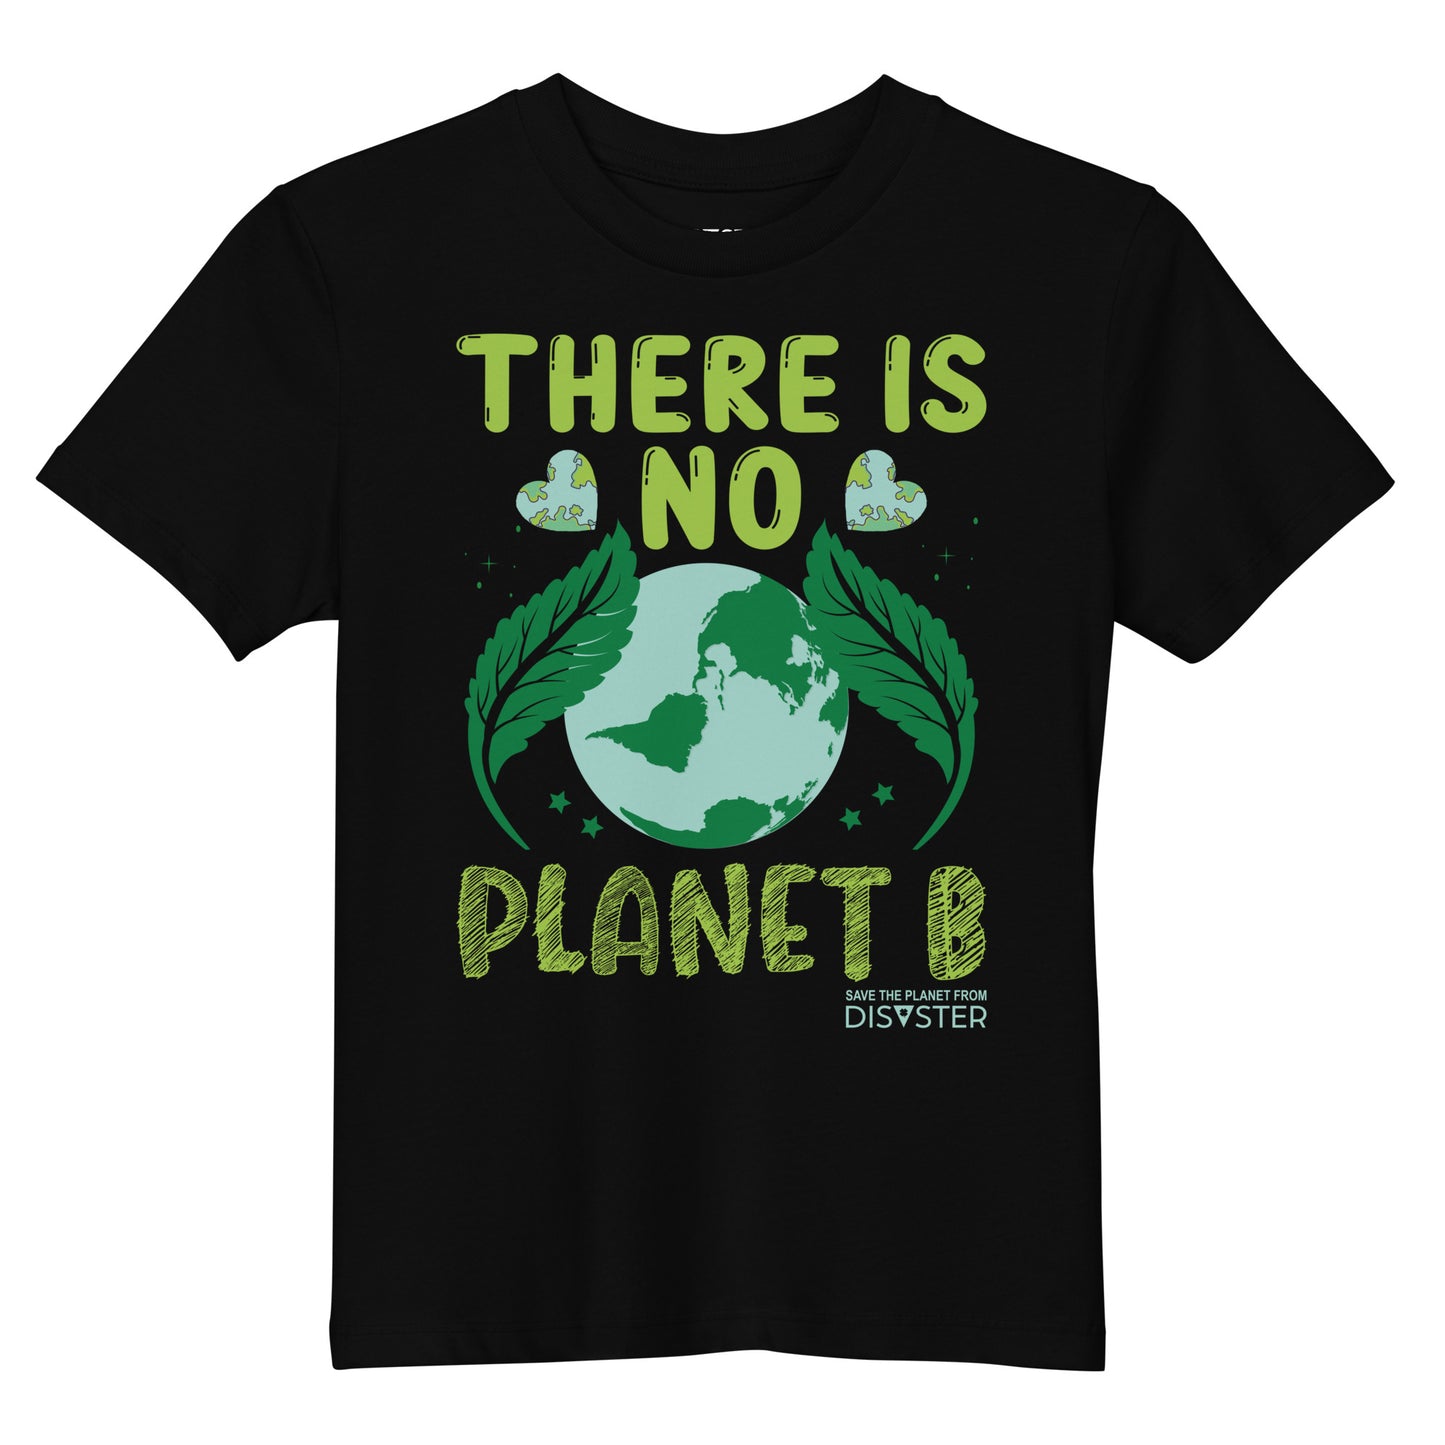 T Shirt Organic Cotton Kids -  There is No Planet B